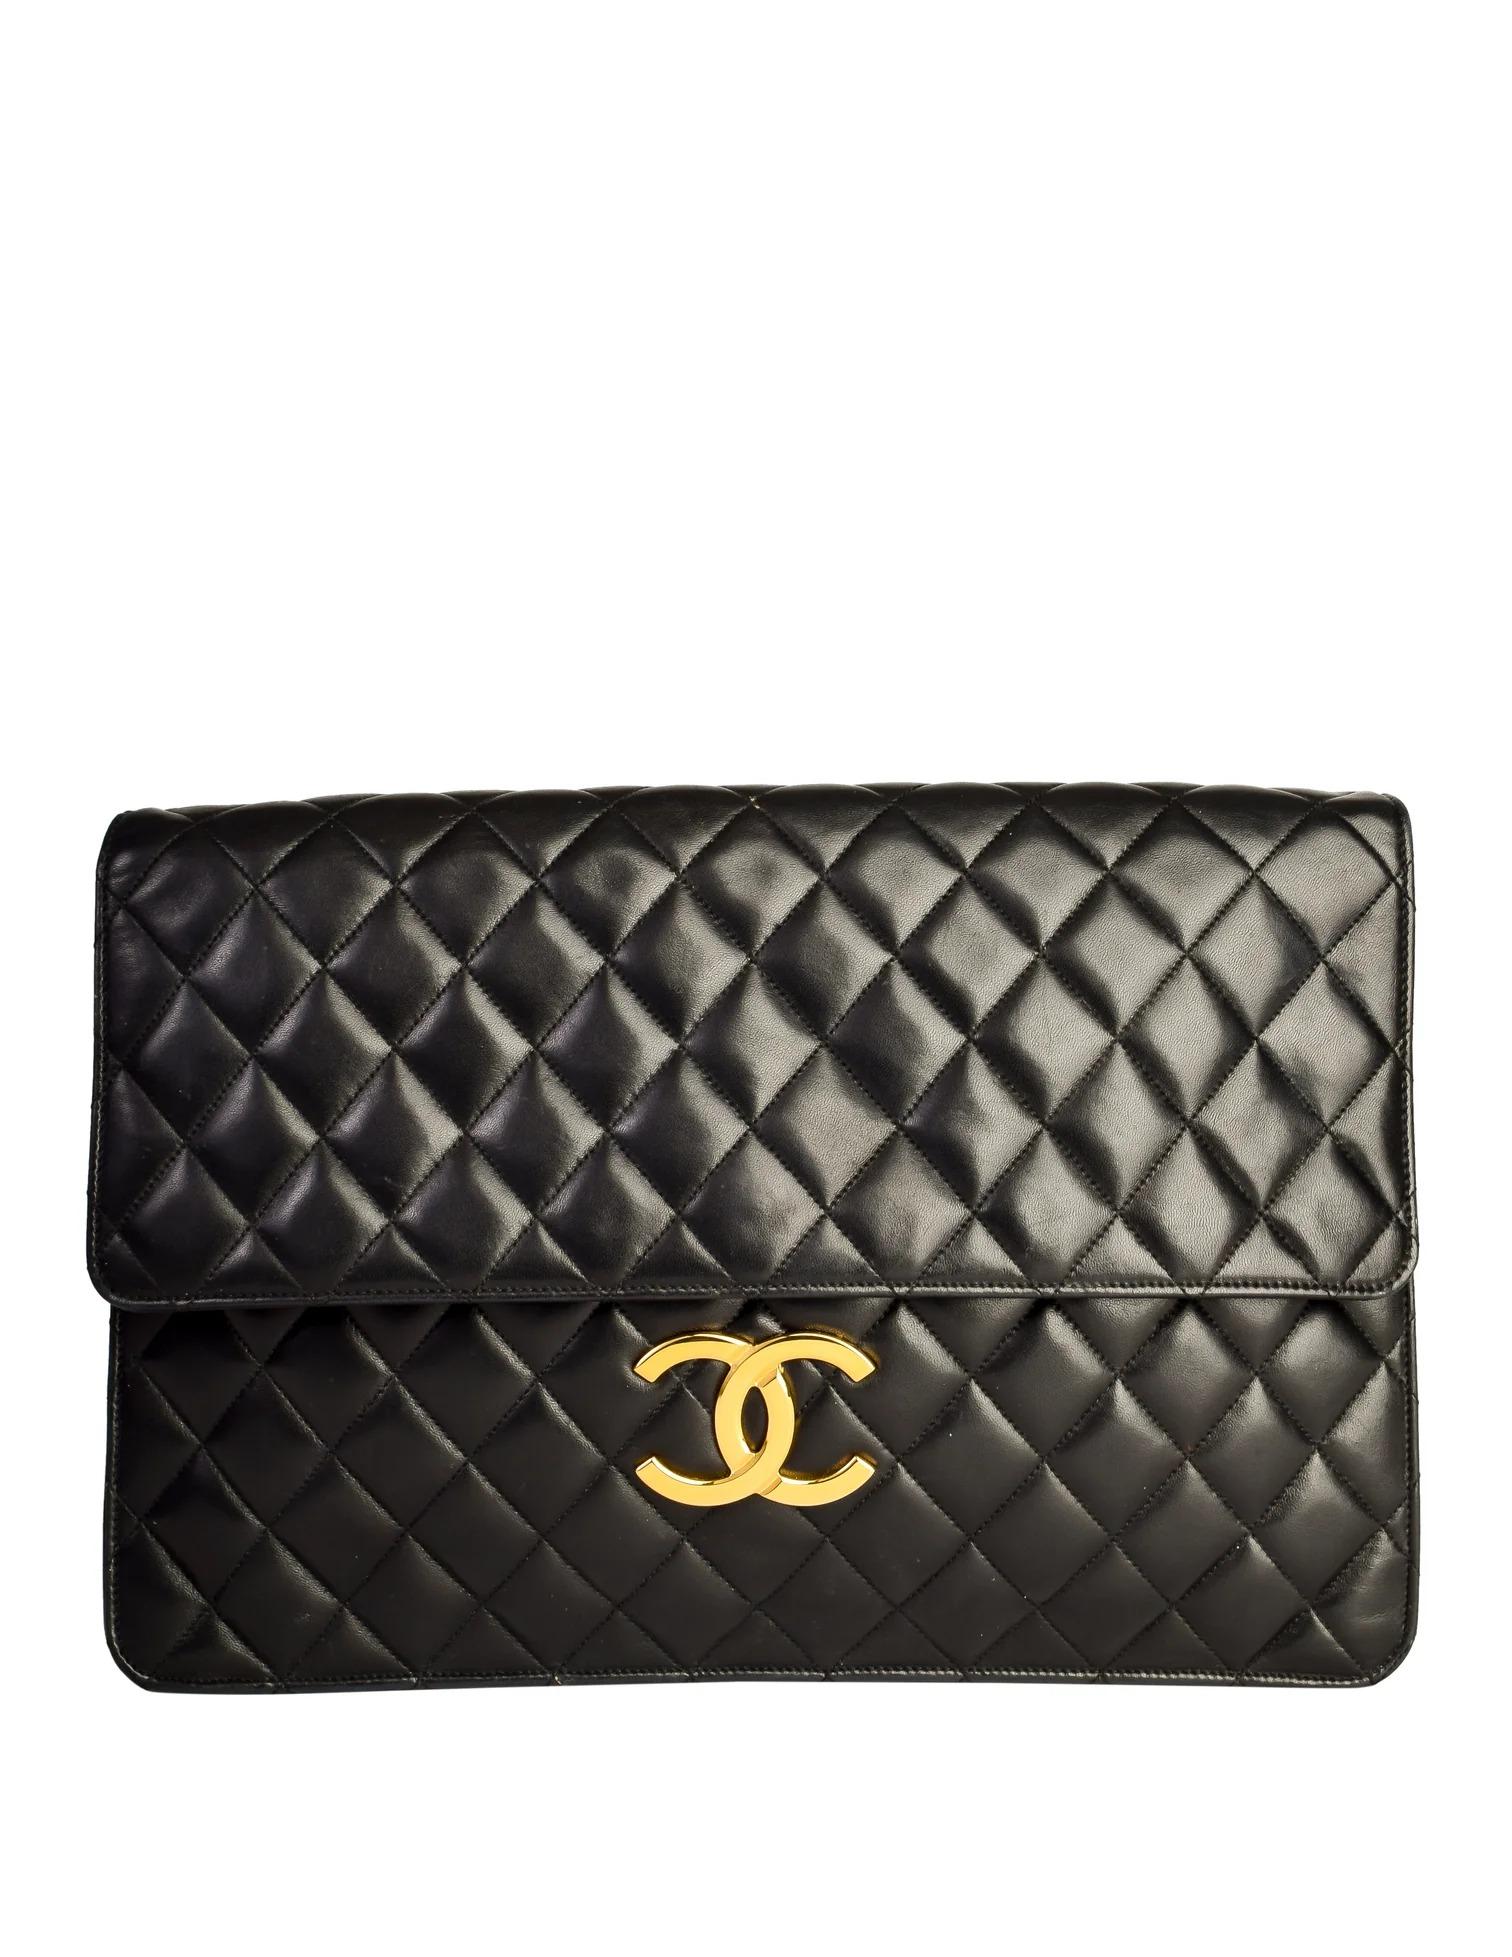 Chanel 1990 Rare Jumbo Maxi XL Vintage Classic Flap Giant Clutch Briefcase For Sale 2